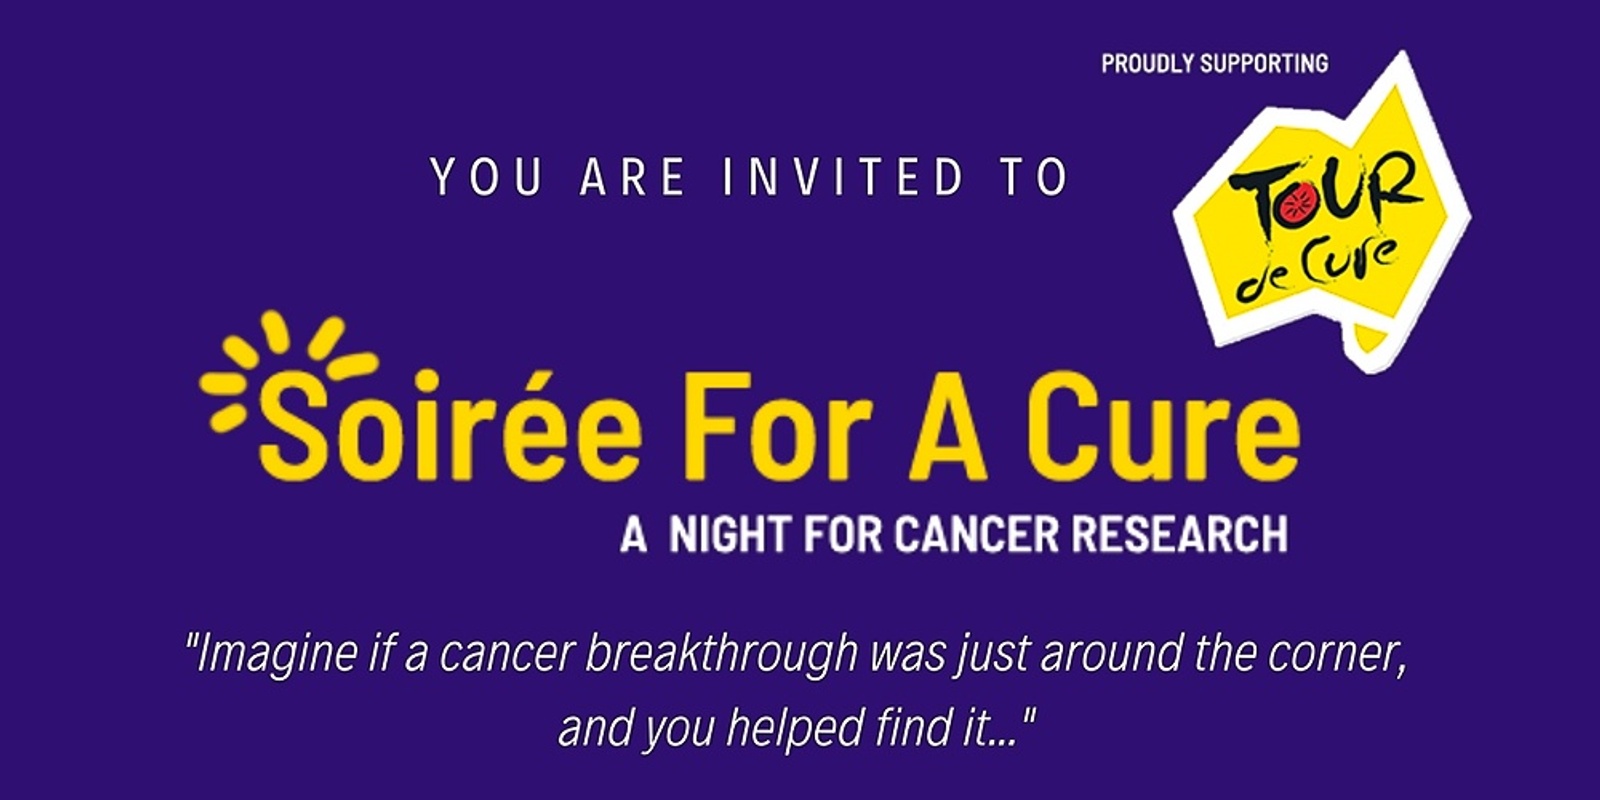 Banner image for Soirée For A Cure